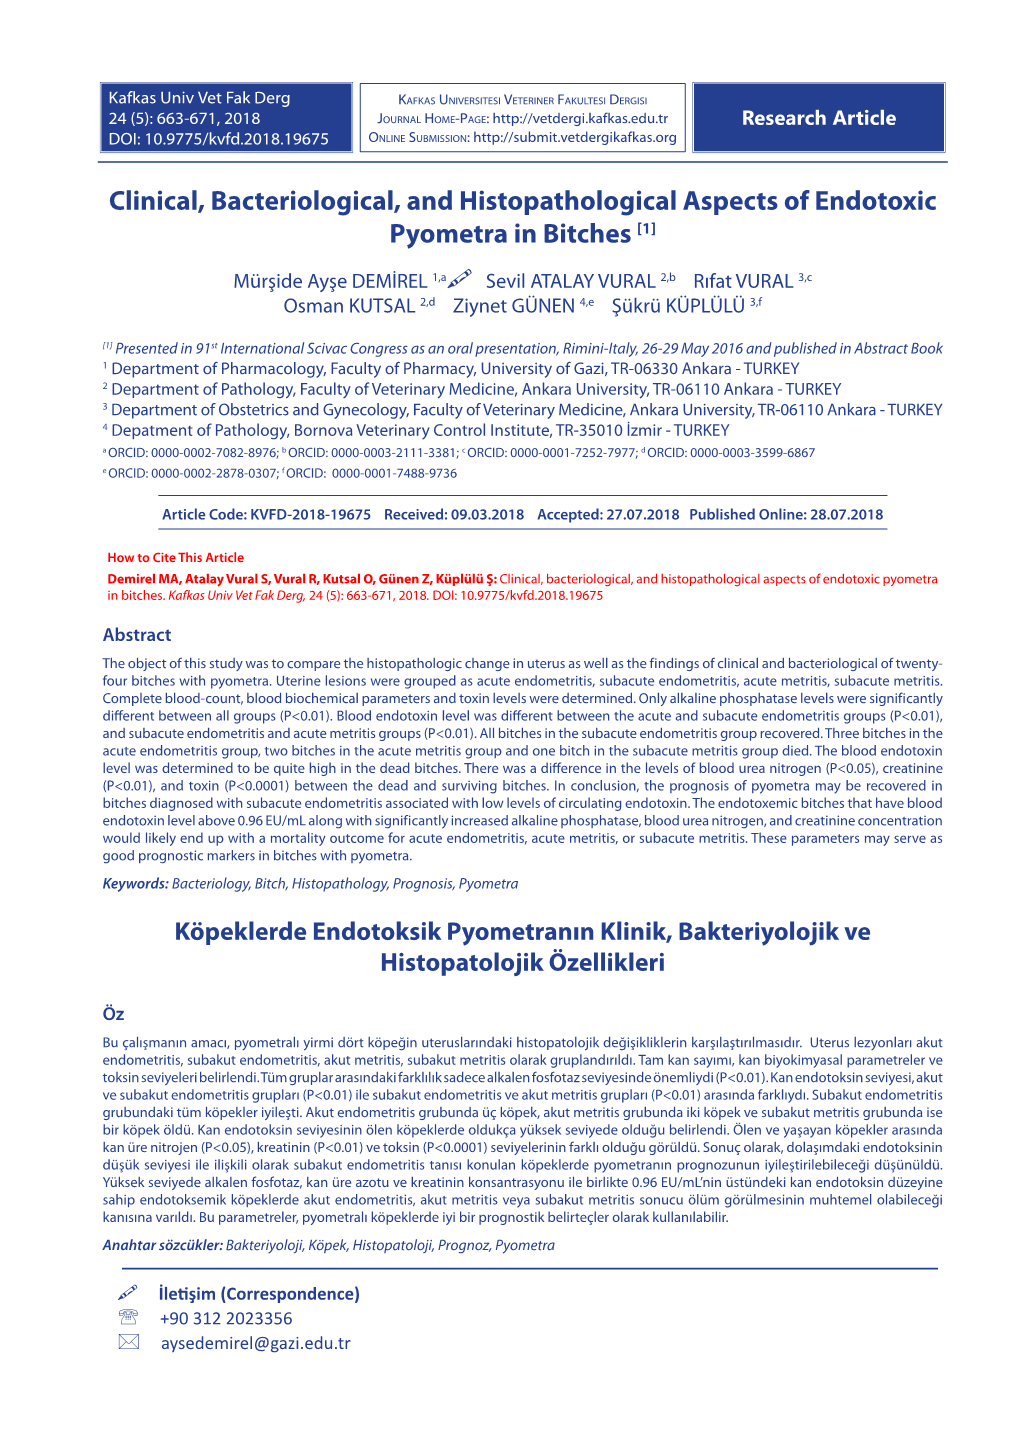 Clinical, Bacteriological, and Histopathological Aspects of Endotoxic Pyometra in Bitches [1]